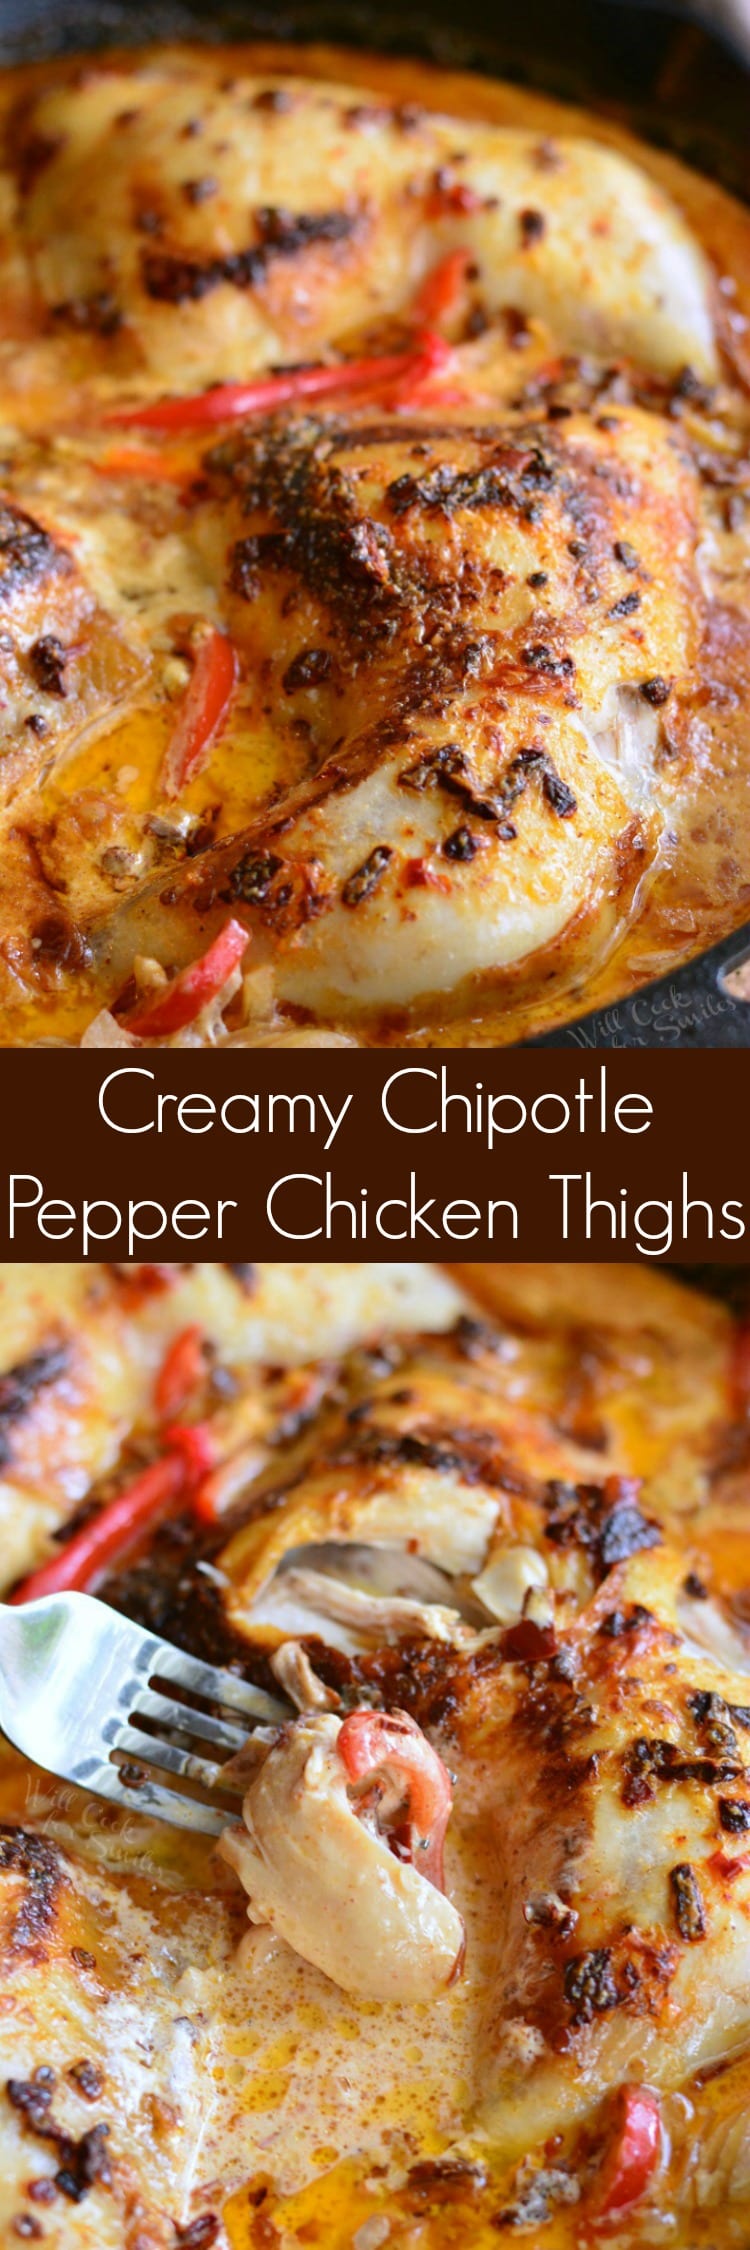 Creamy Chipotle Pepper Chicken Thighs in a pan collage 